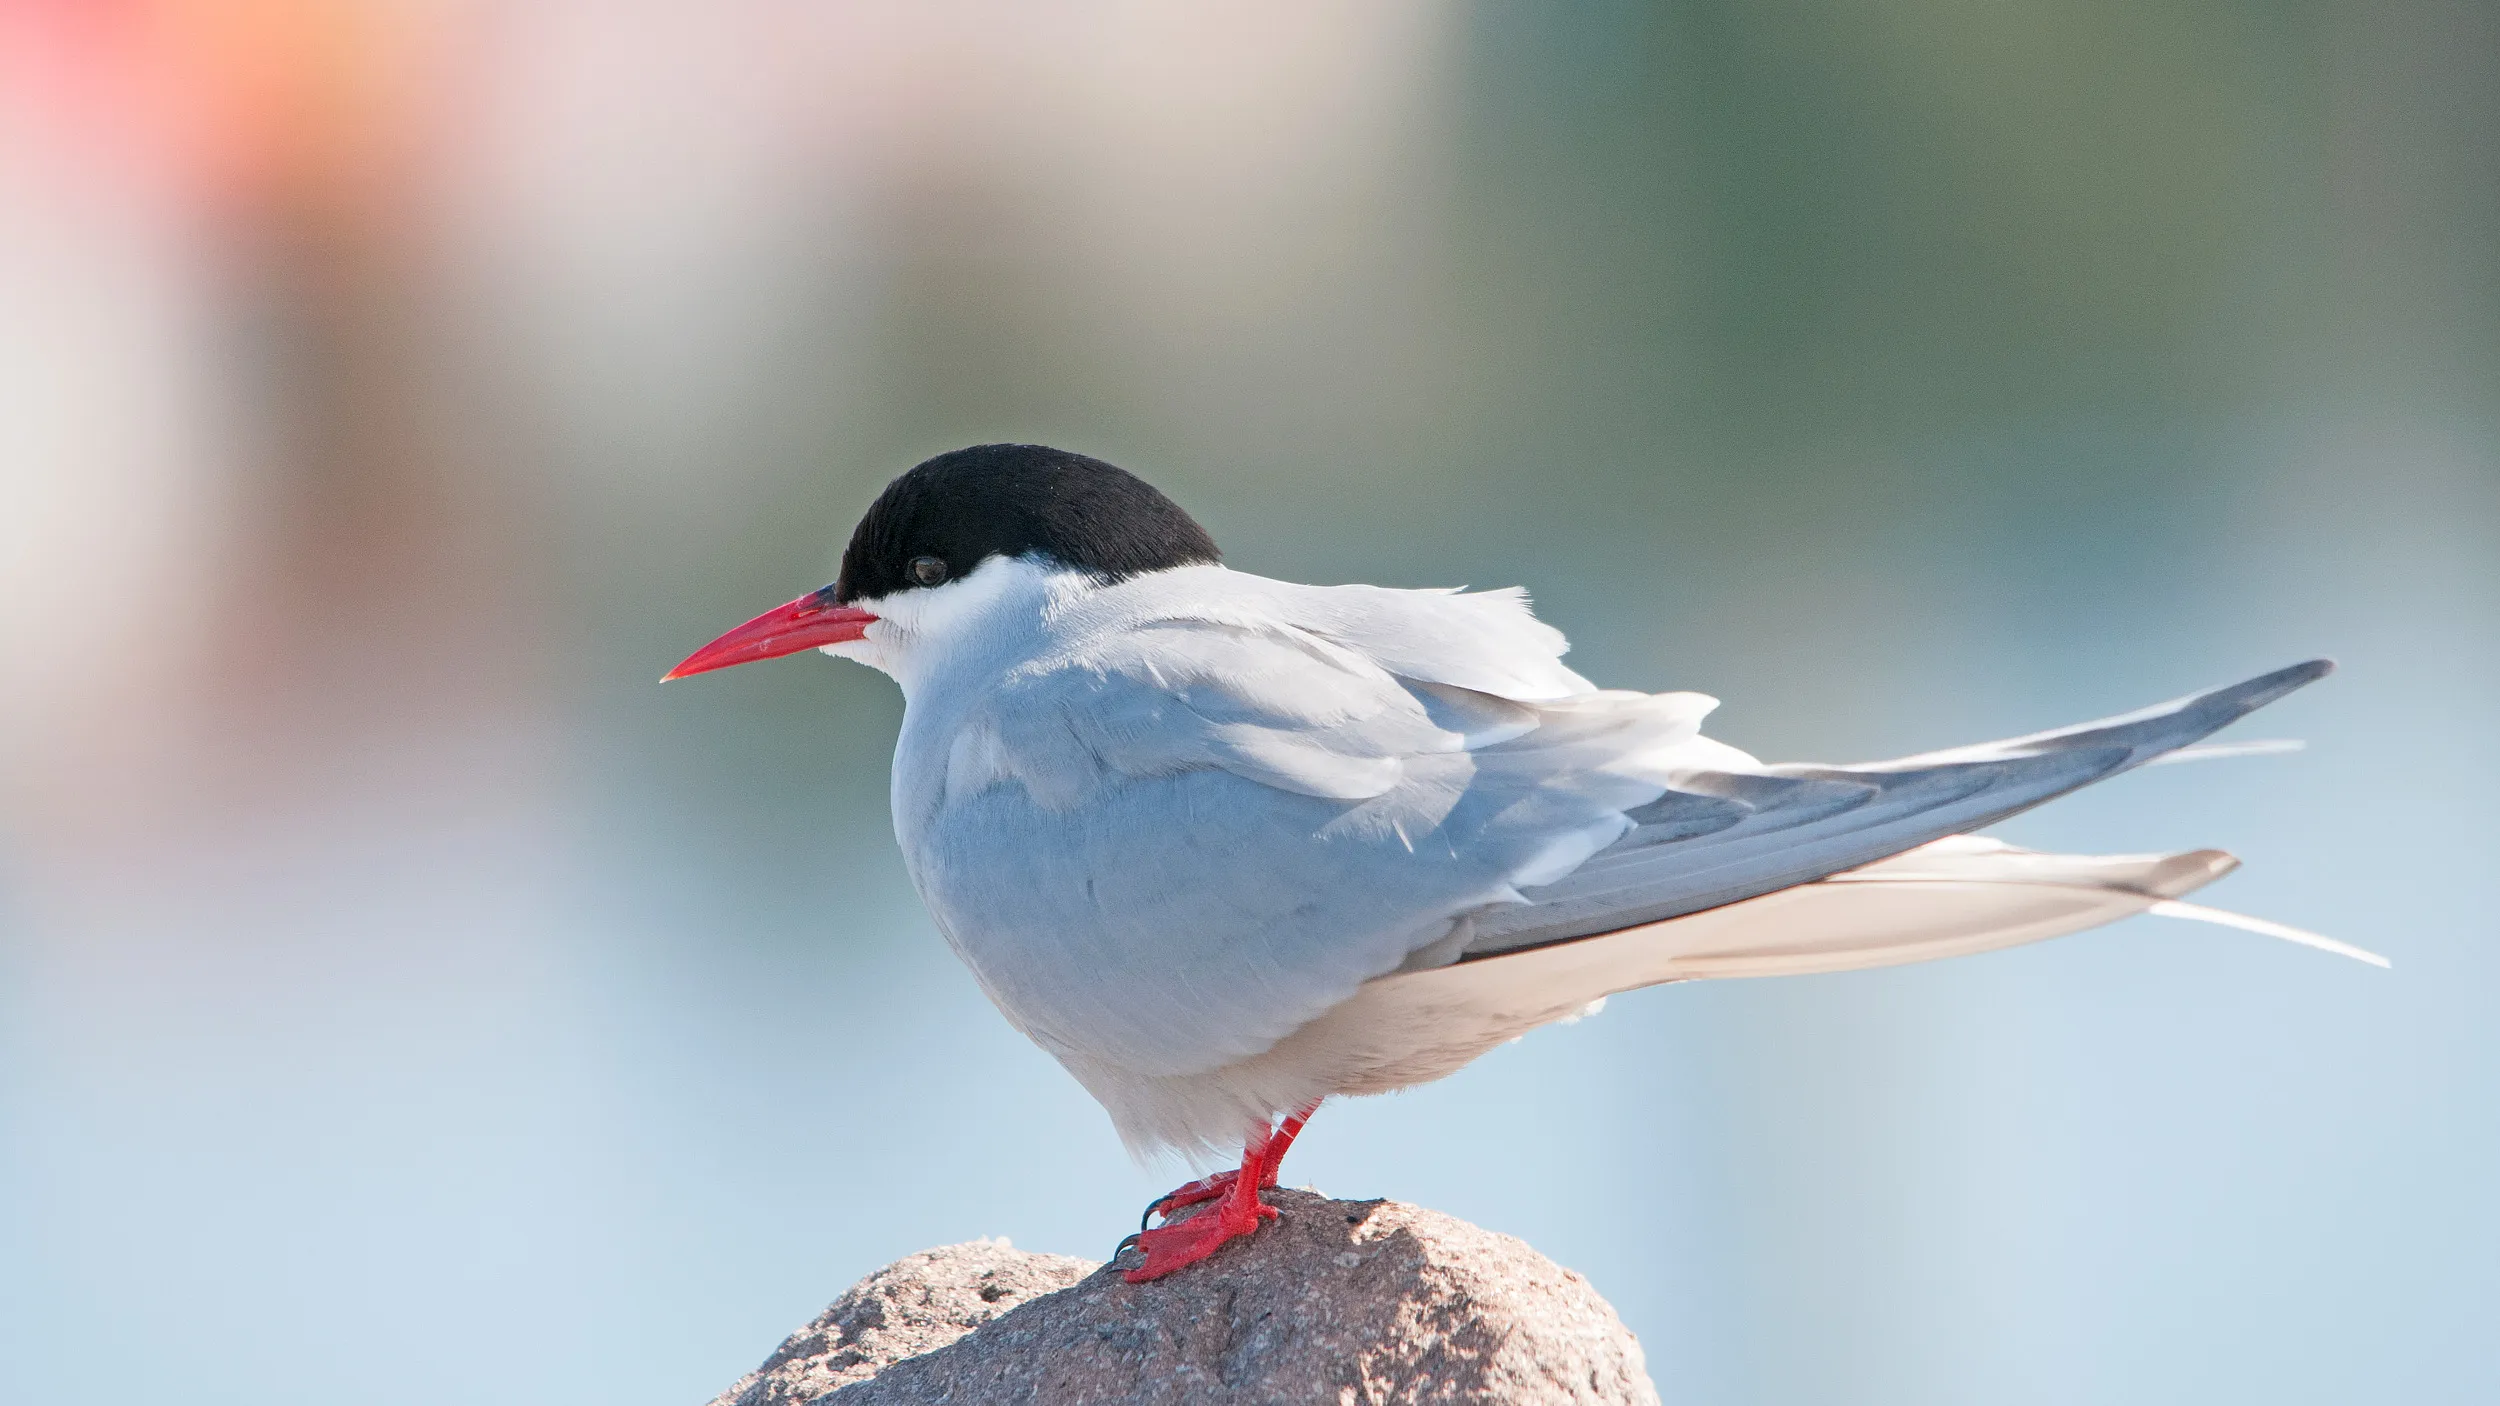 A lone Arctic Tern stood facing away from the camera on the top of a rock.